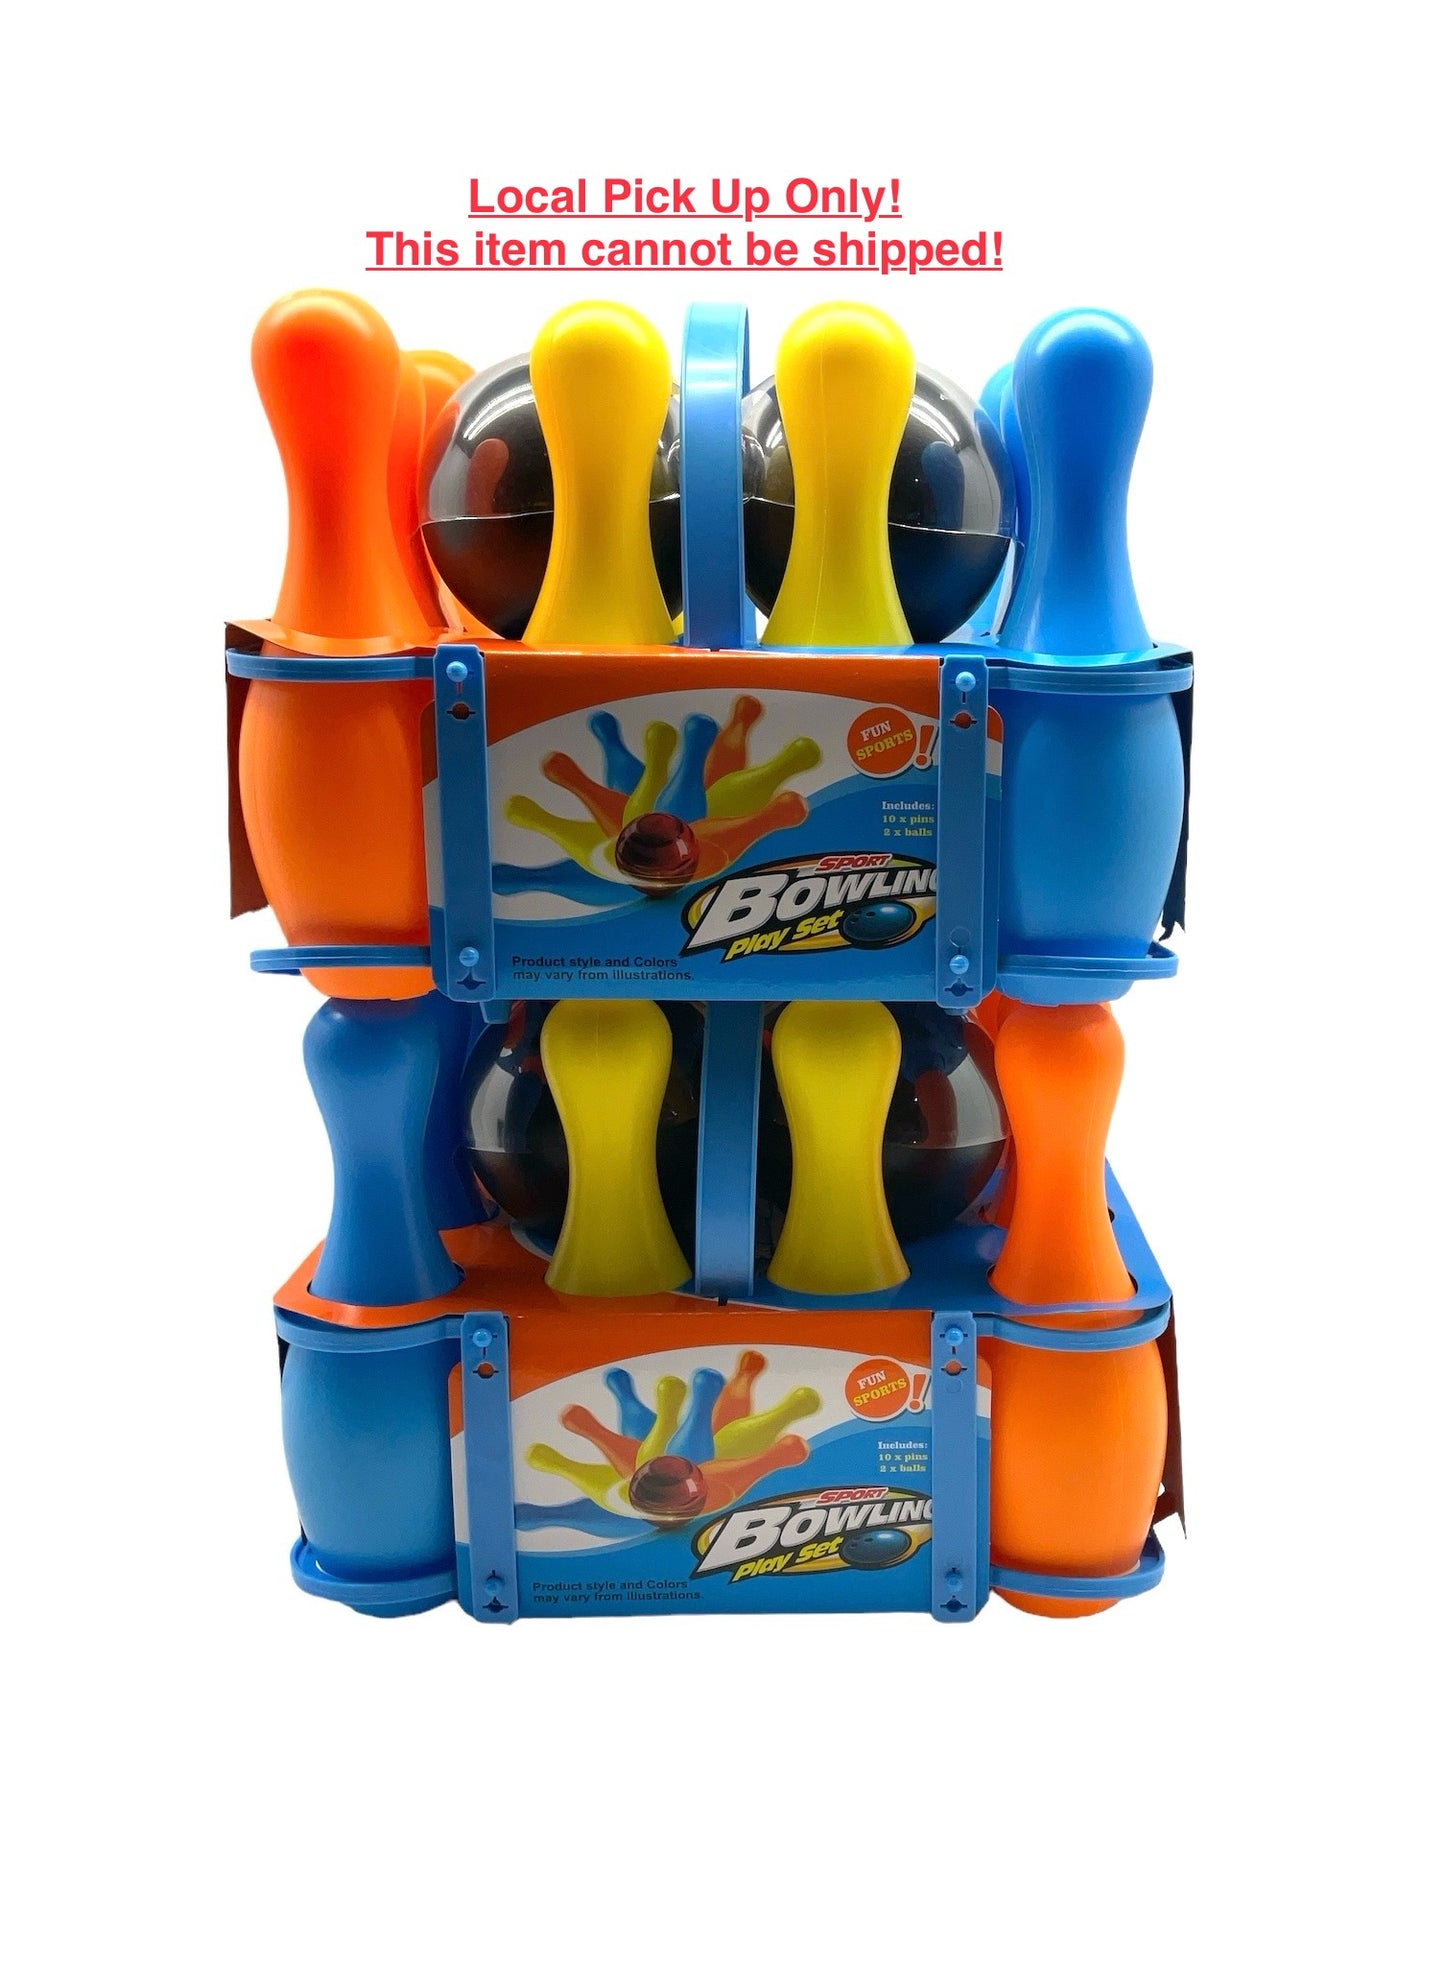 Bowling Play Set Case of 2